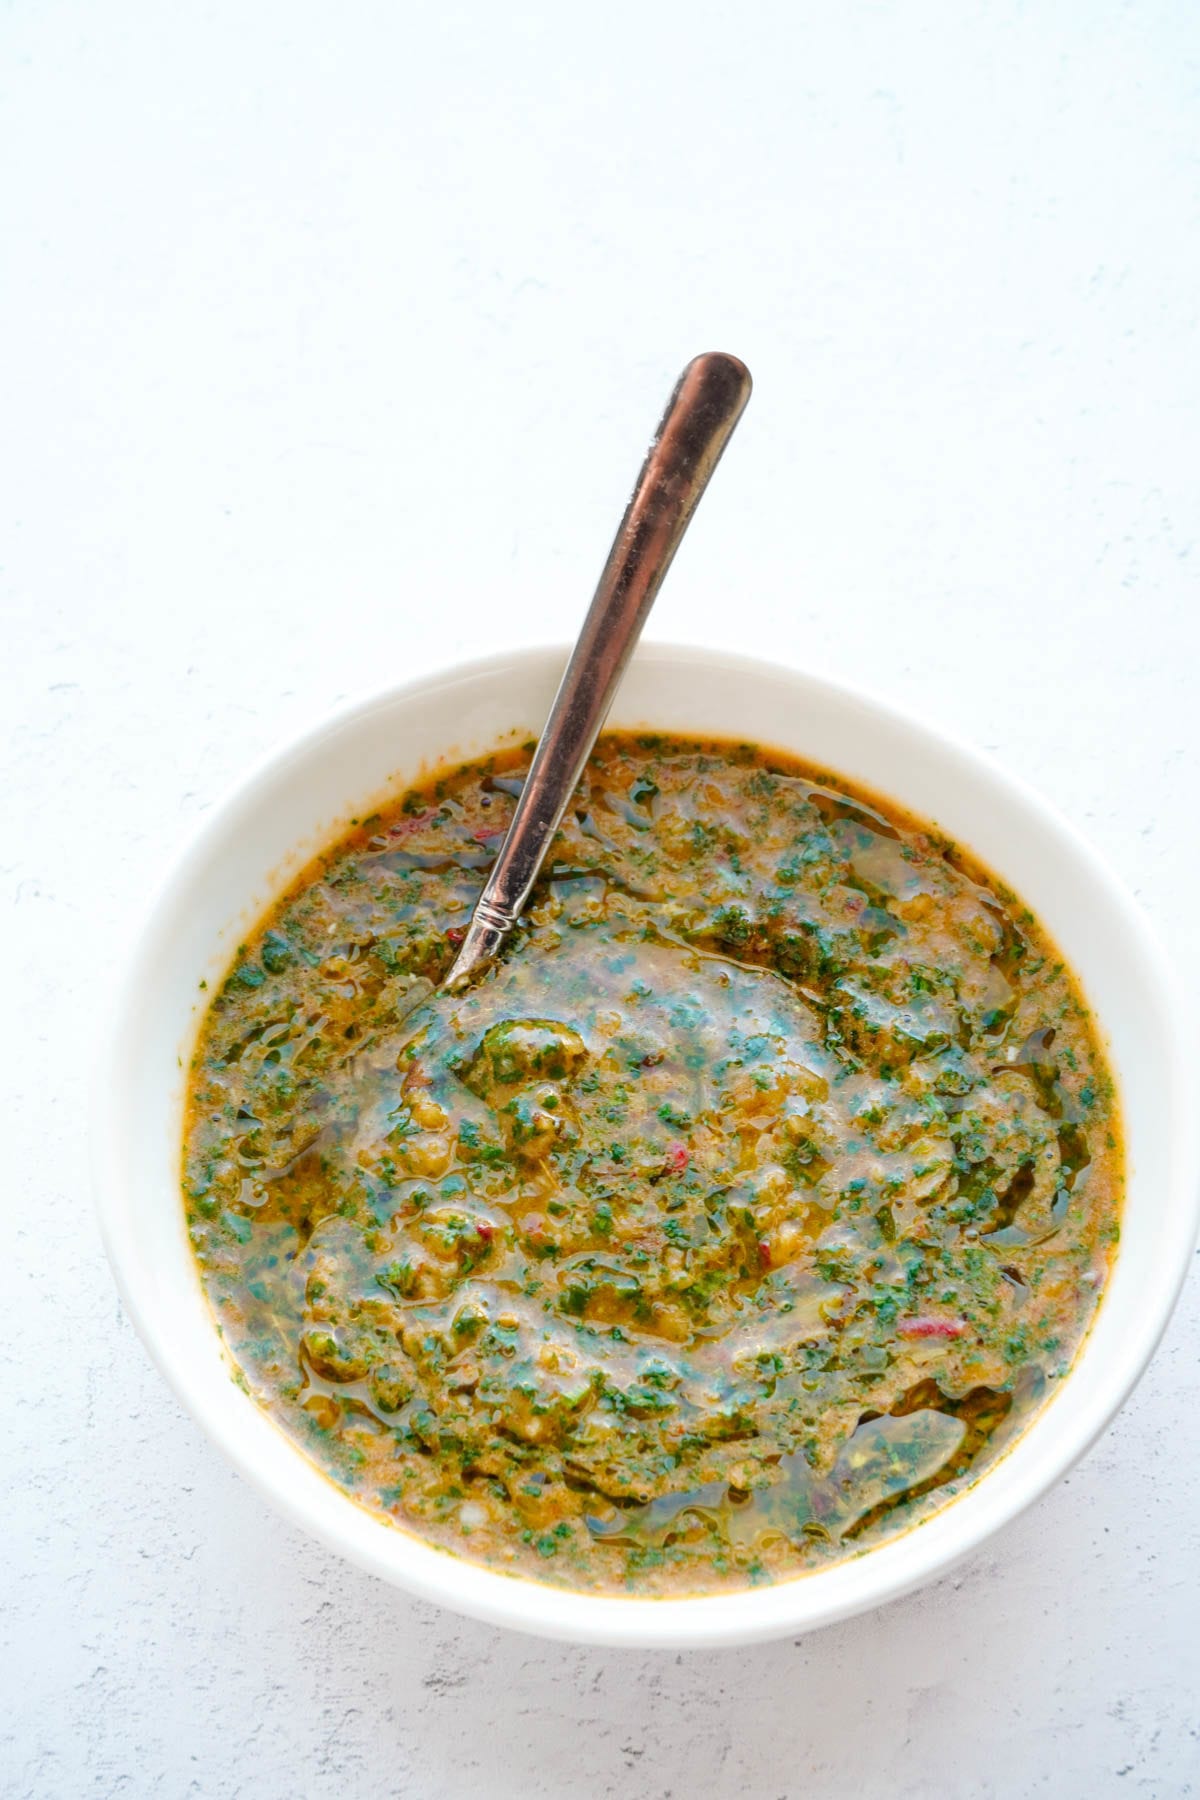 Chipotle Chimichurri sauce in a bowl